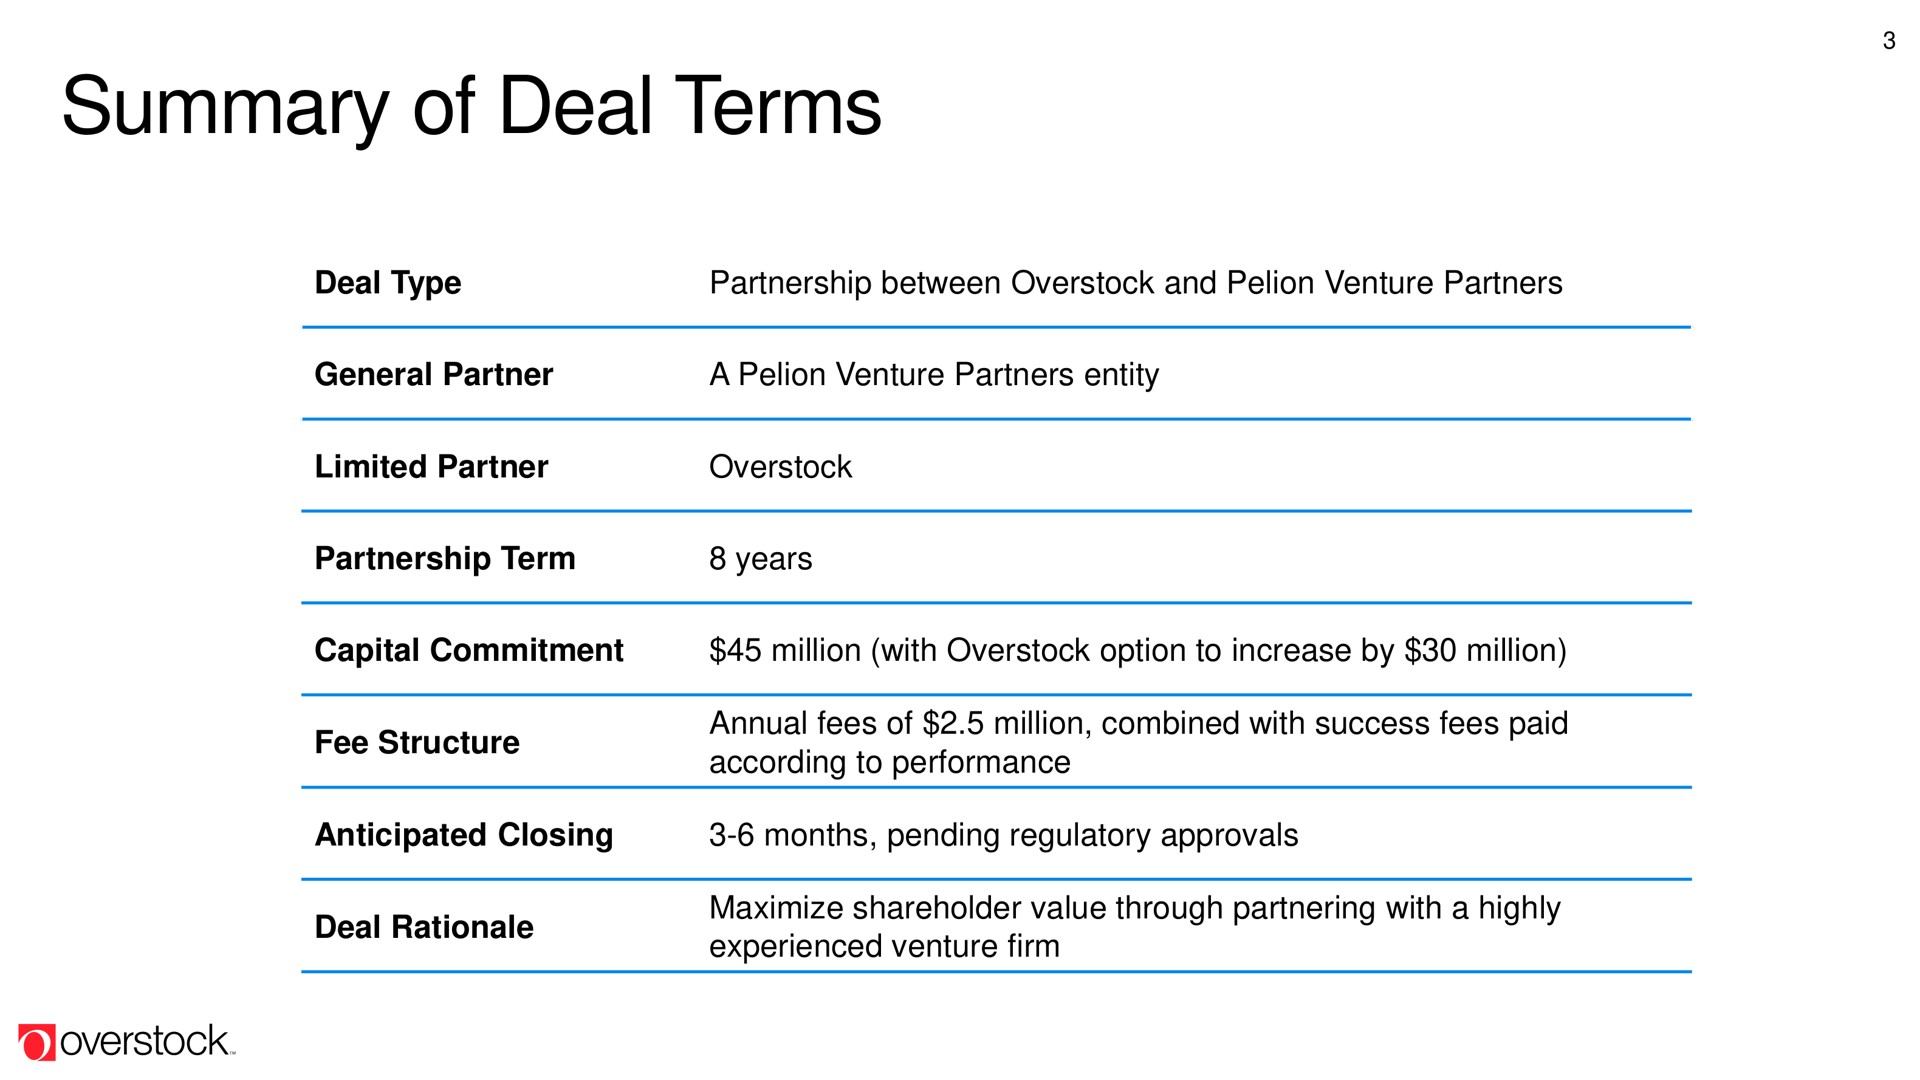 summary of deal terms | Overstock